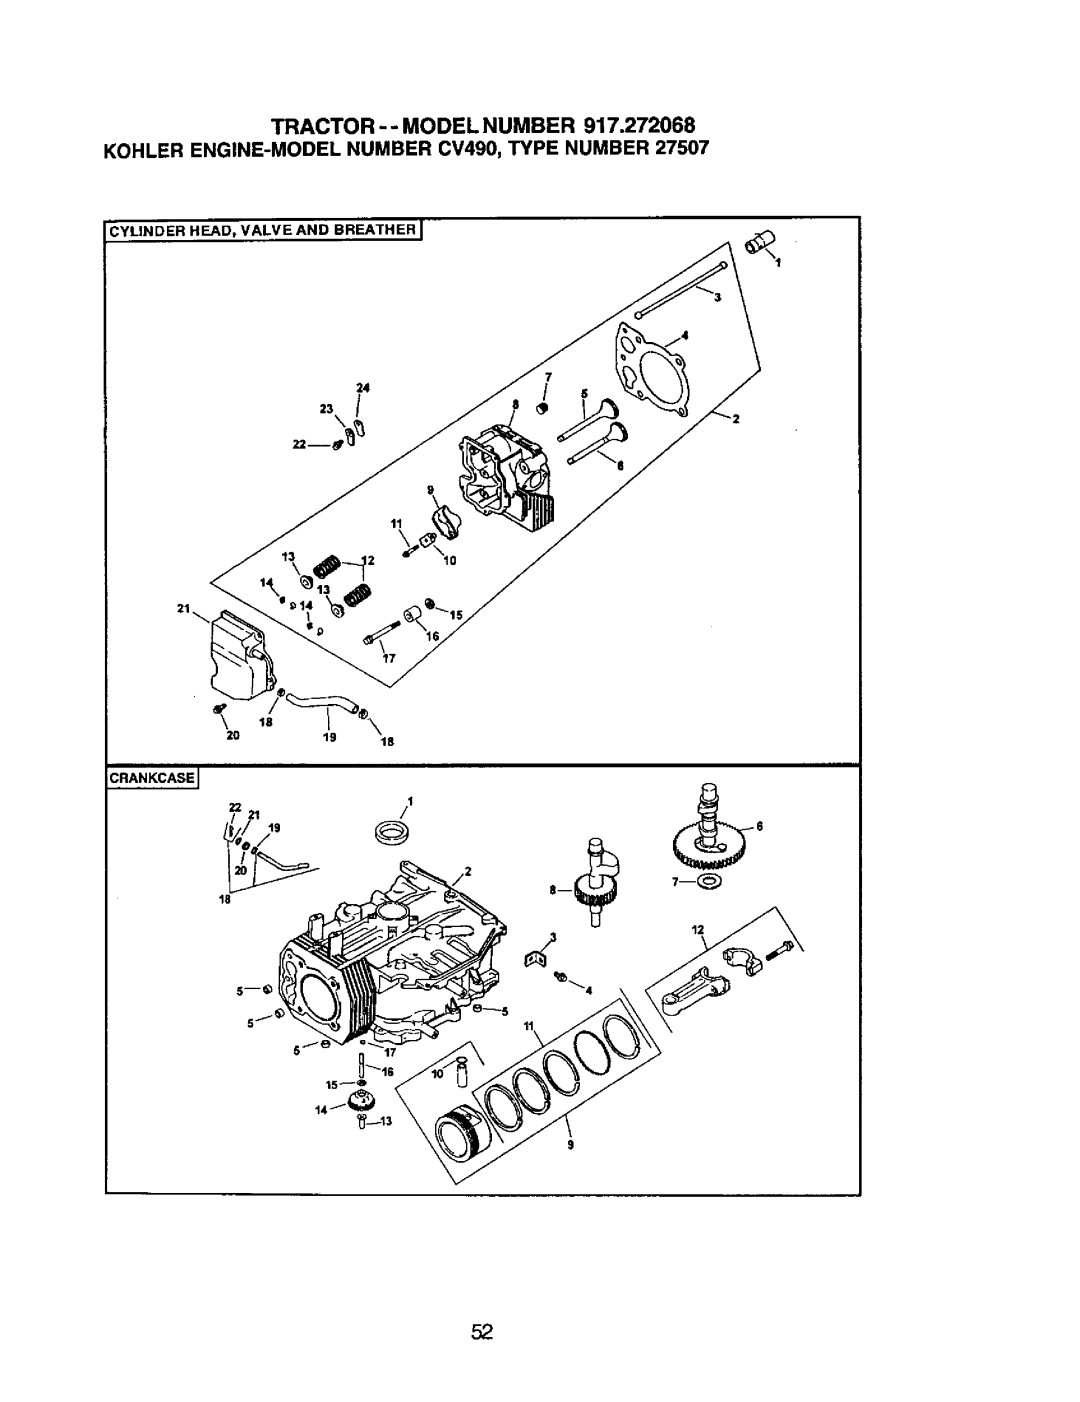 Craftsman 917.272068 owner manual Cylinder Head, Valve And Breather, 12 5m_ 